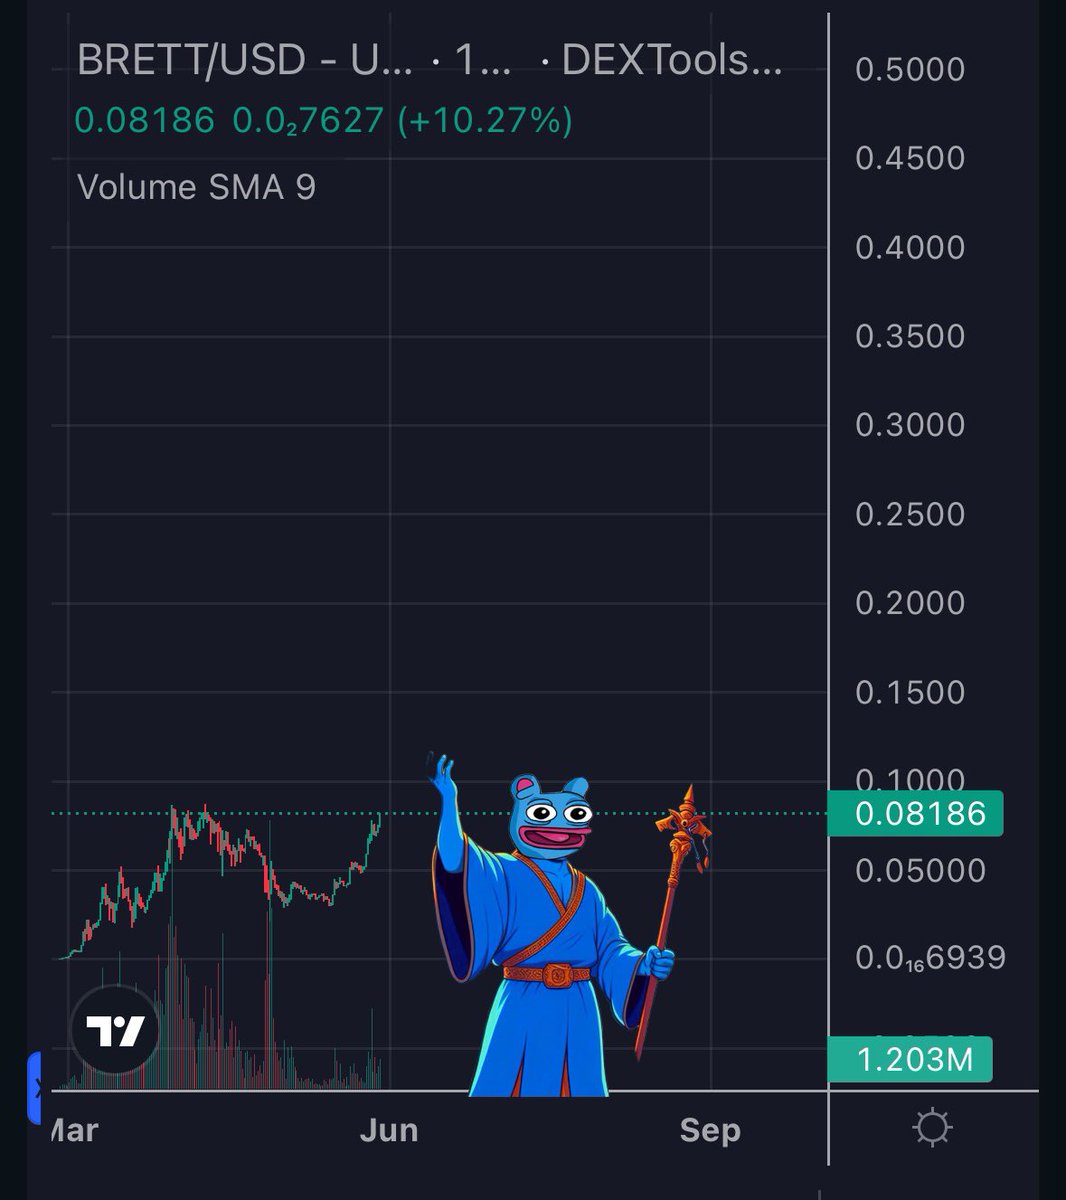 $BRETT back to ATH 830m.

The most bullish chart I’ve ever seen along with $PEPE.

We’re reaching a point where lots of normies in my DM’s asking how to buy $BRETT .

@BasedBrett is going to billions and there is nothing you can do about it.

Join the ride to Valhalla or cry.